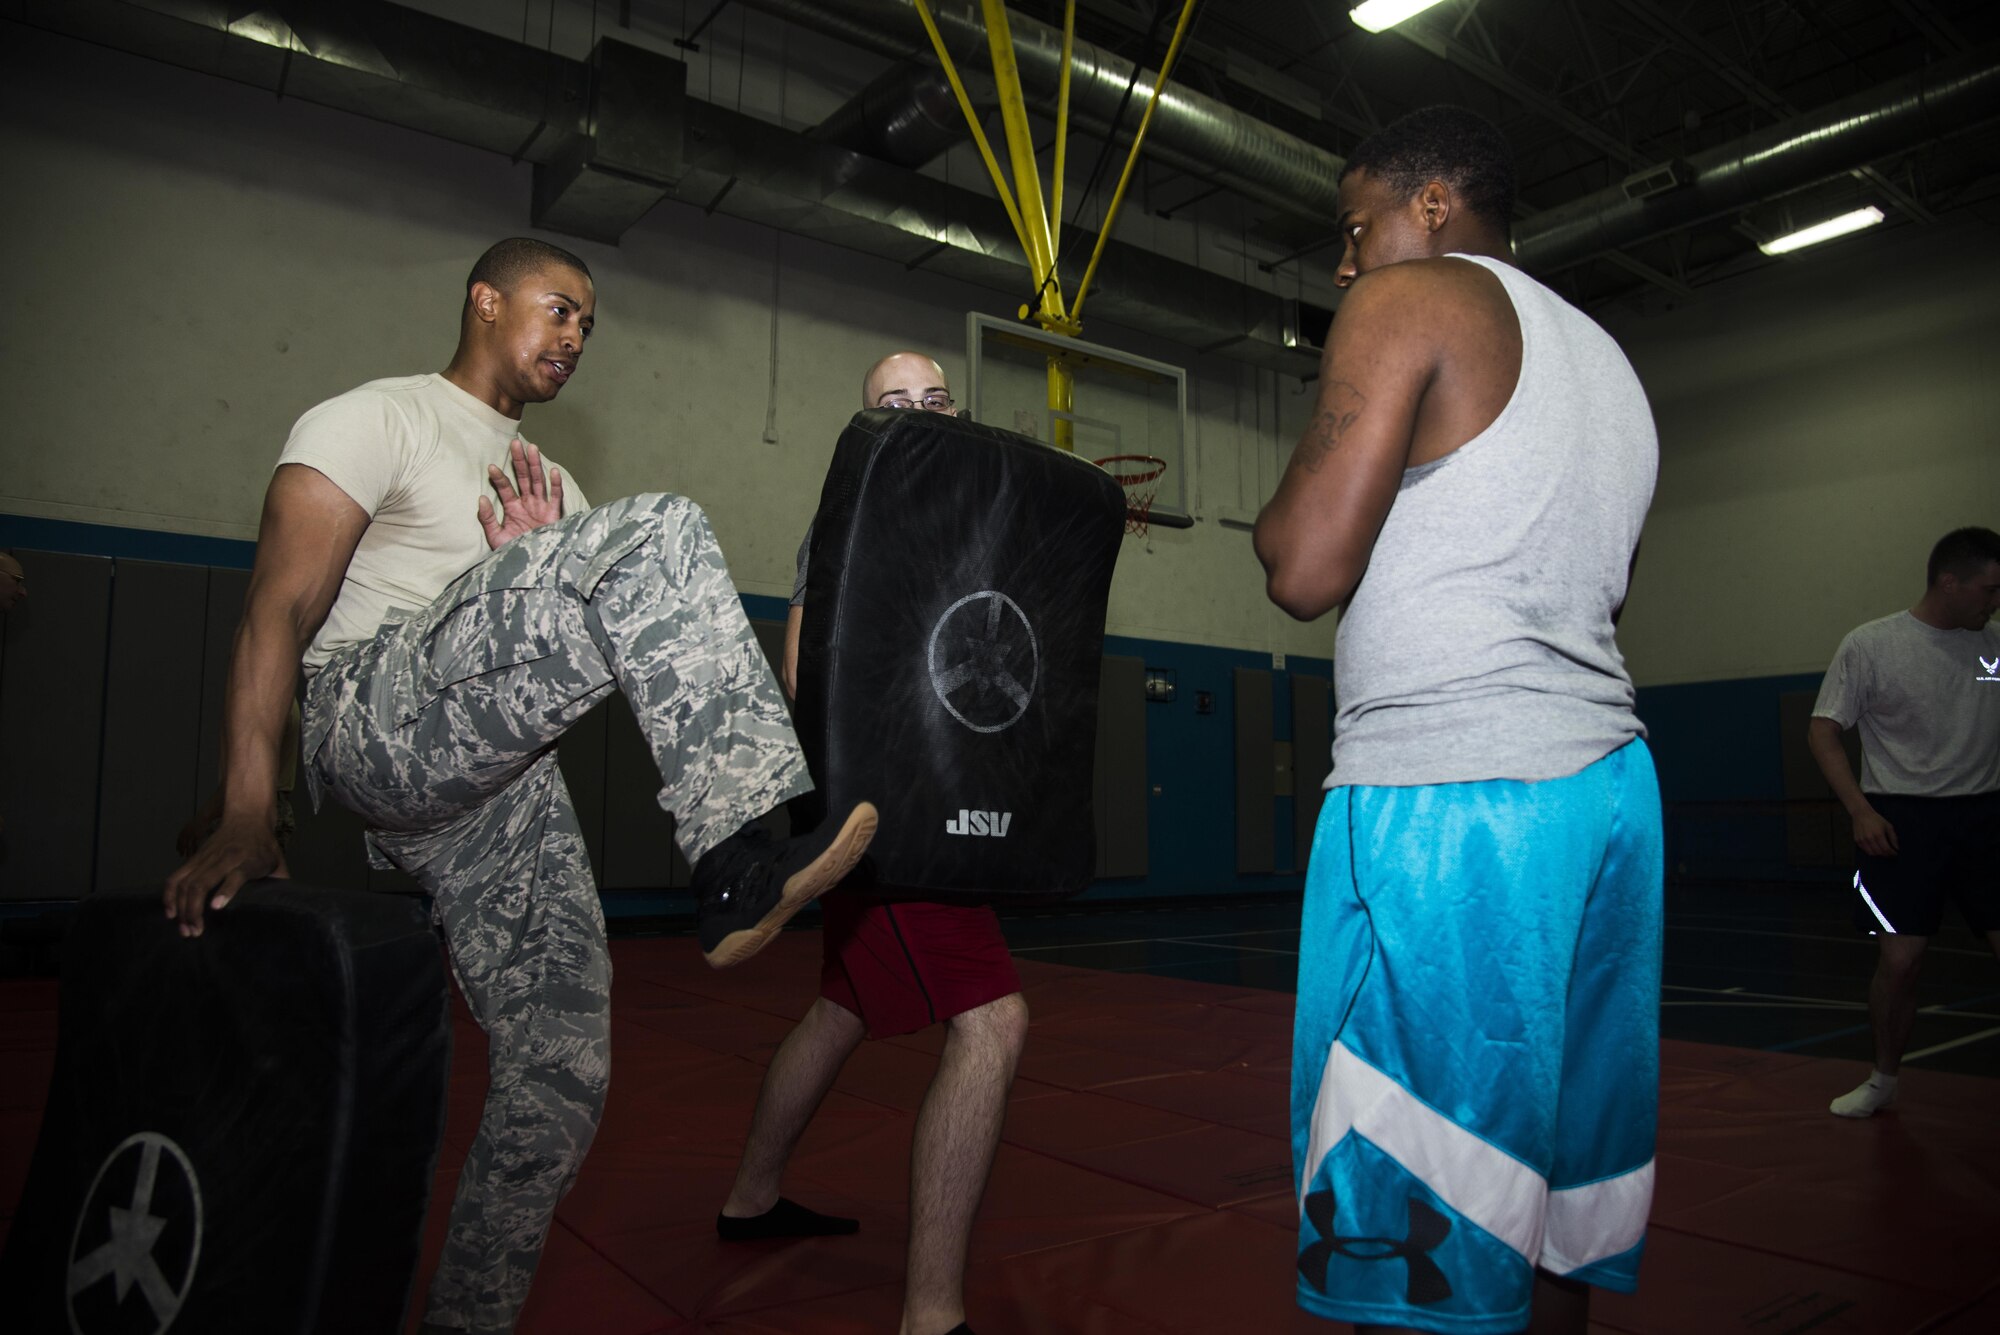 Staff Sgt. Jared Kimbrough, 379th Expeditionary Security Forces Check Six facilitator and training non-commissioned officer in charge, instructs proper technique on kicking during a combatives class at the Blanchard-Preston Complex gym May 29, 2015 at Al Udeid Air Base, Qatar. Bi-weekly, Airmen of the 379th Expeditionary Security Forces Squadron instruct members on non-lethal ways to defend themselves. (U.S. Air Force photo by Tech. Sgt. Rasheen Douglas)